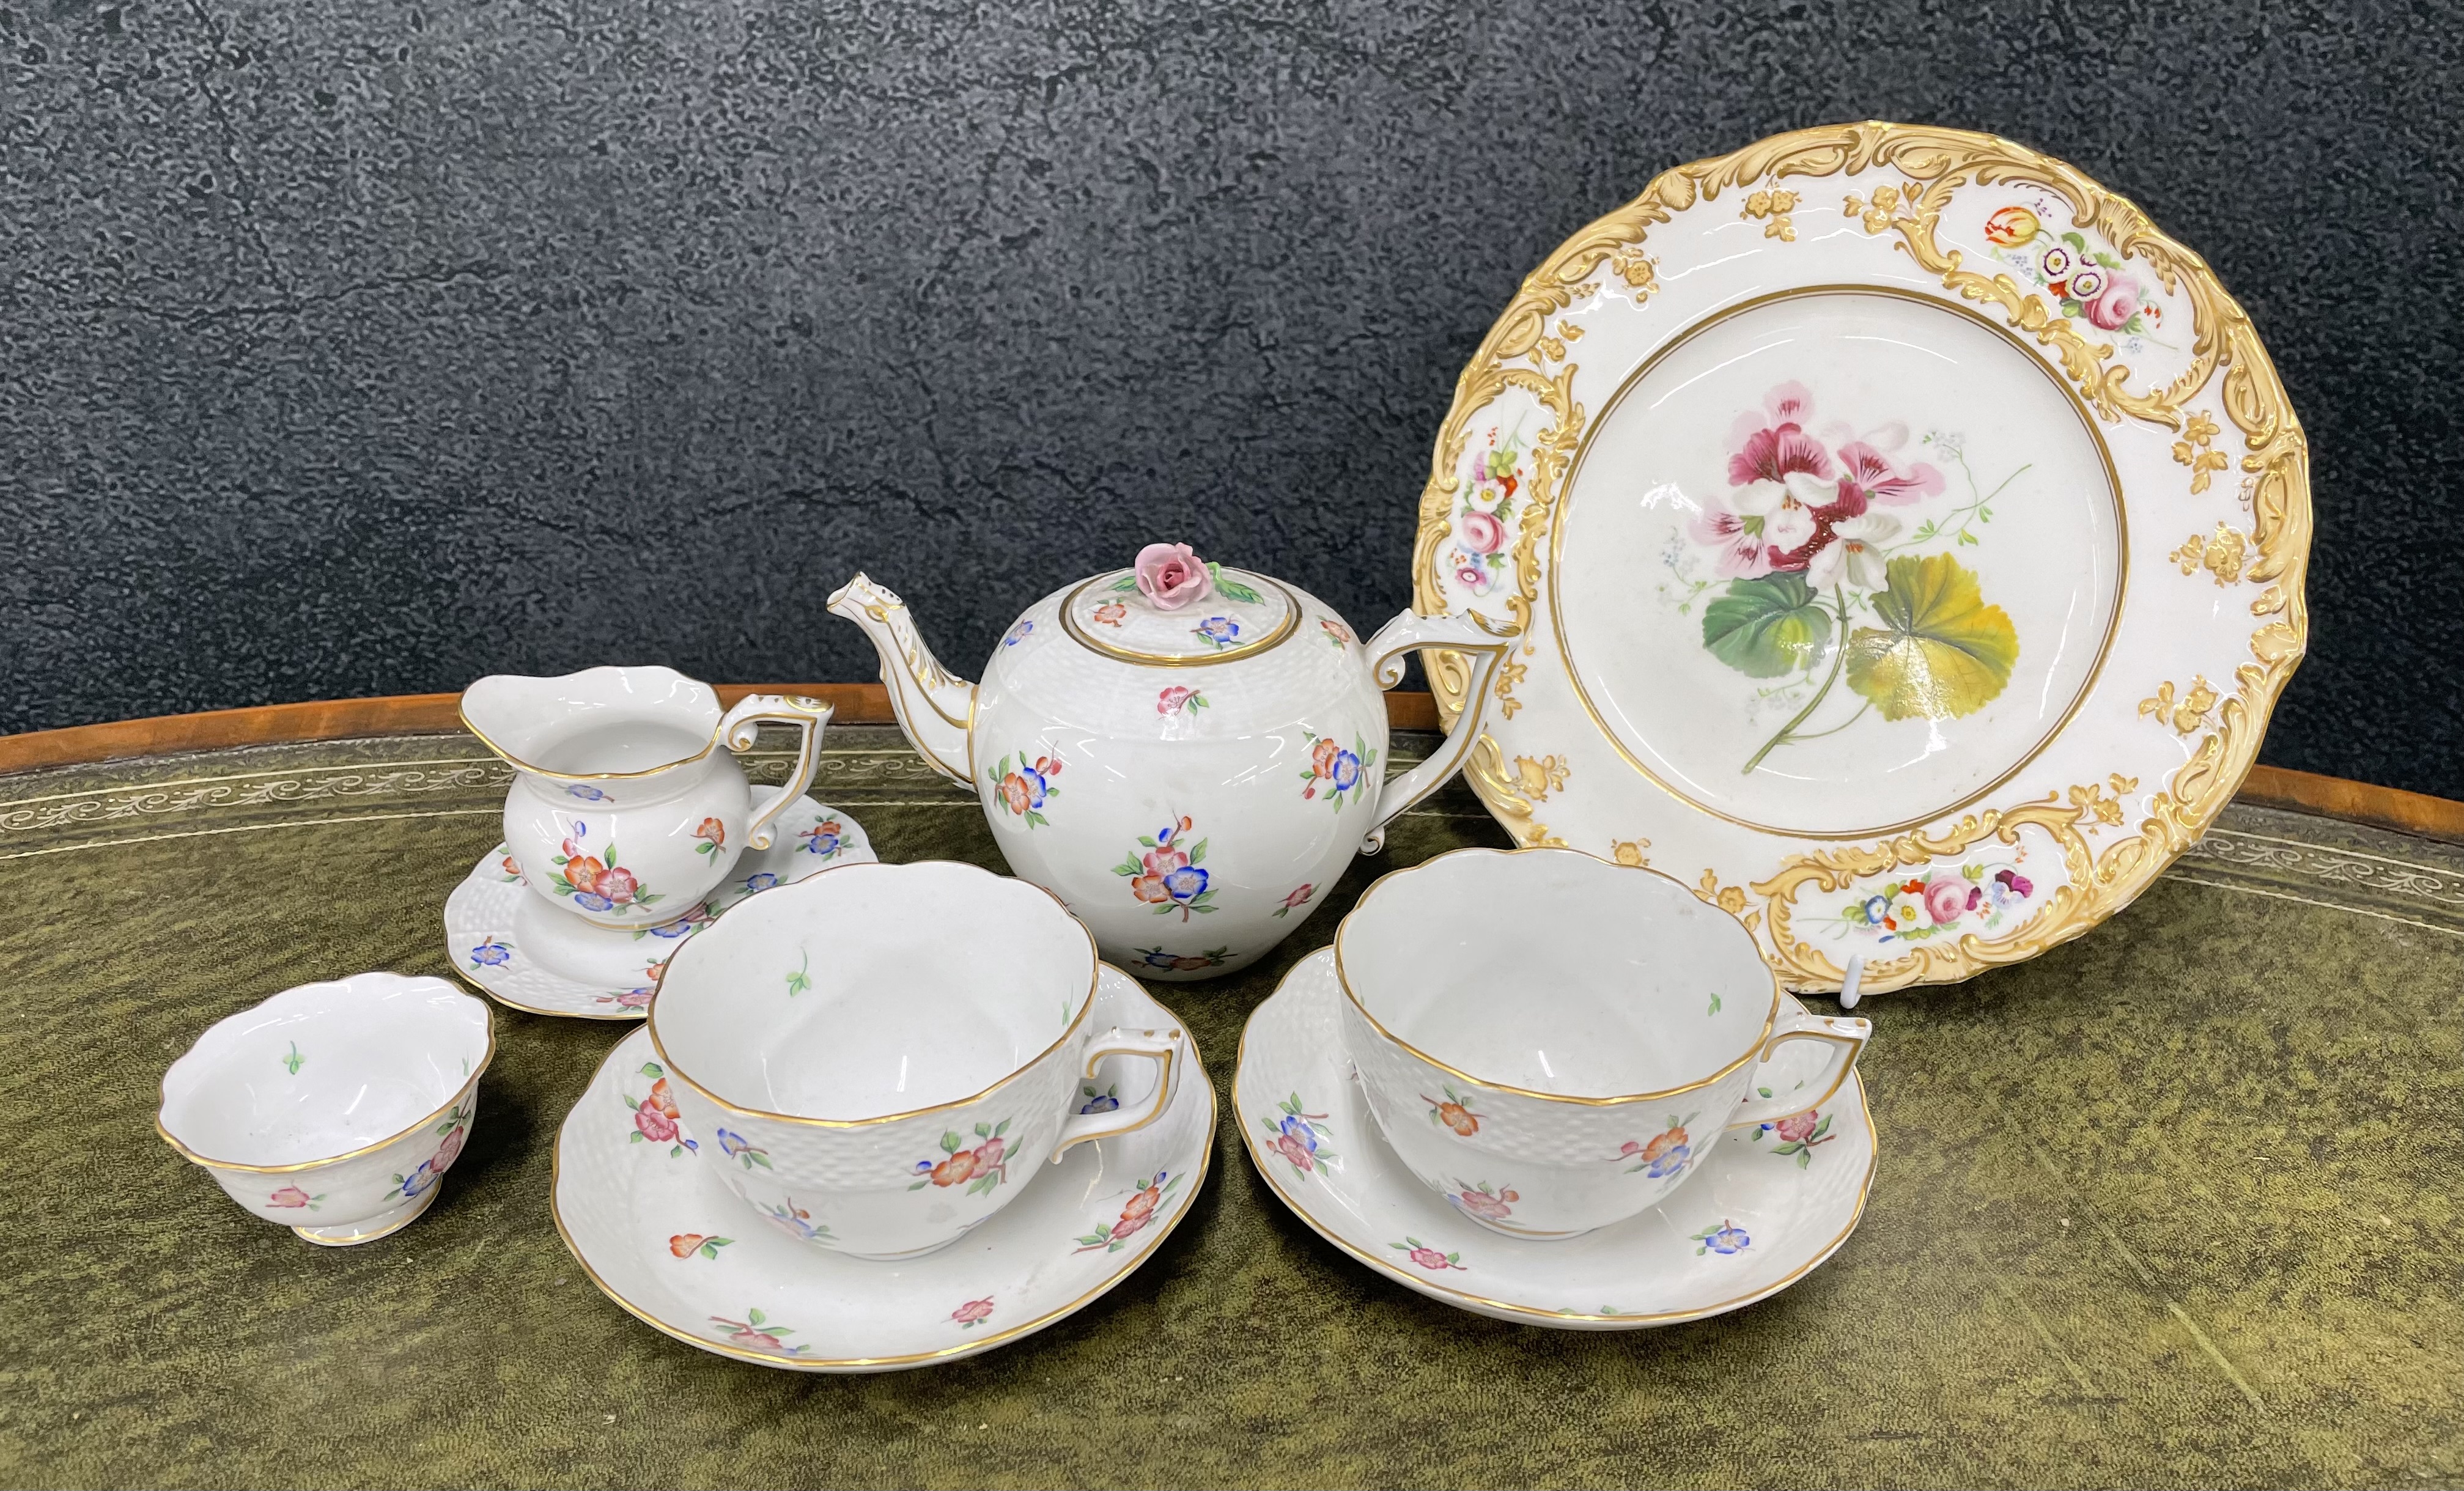 Herend handpainted 'tea for two' porcelain tea set; together with a 19th Century cabinet plate